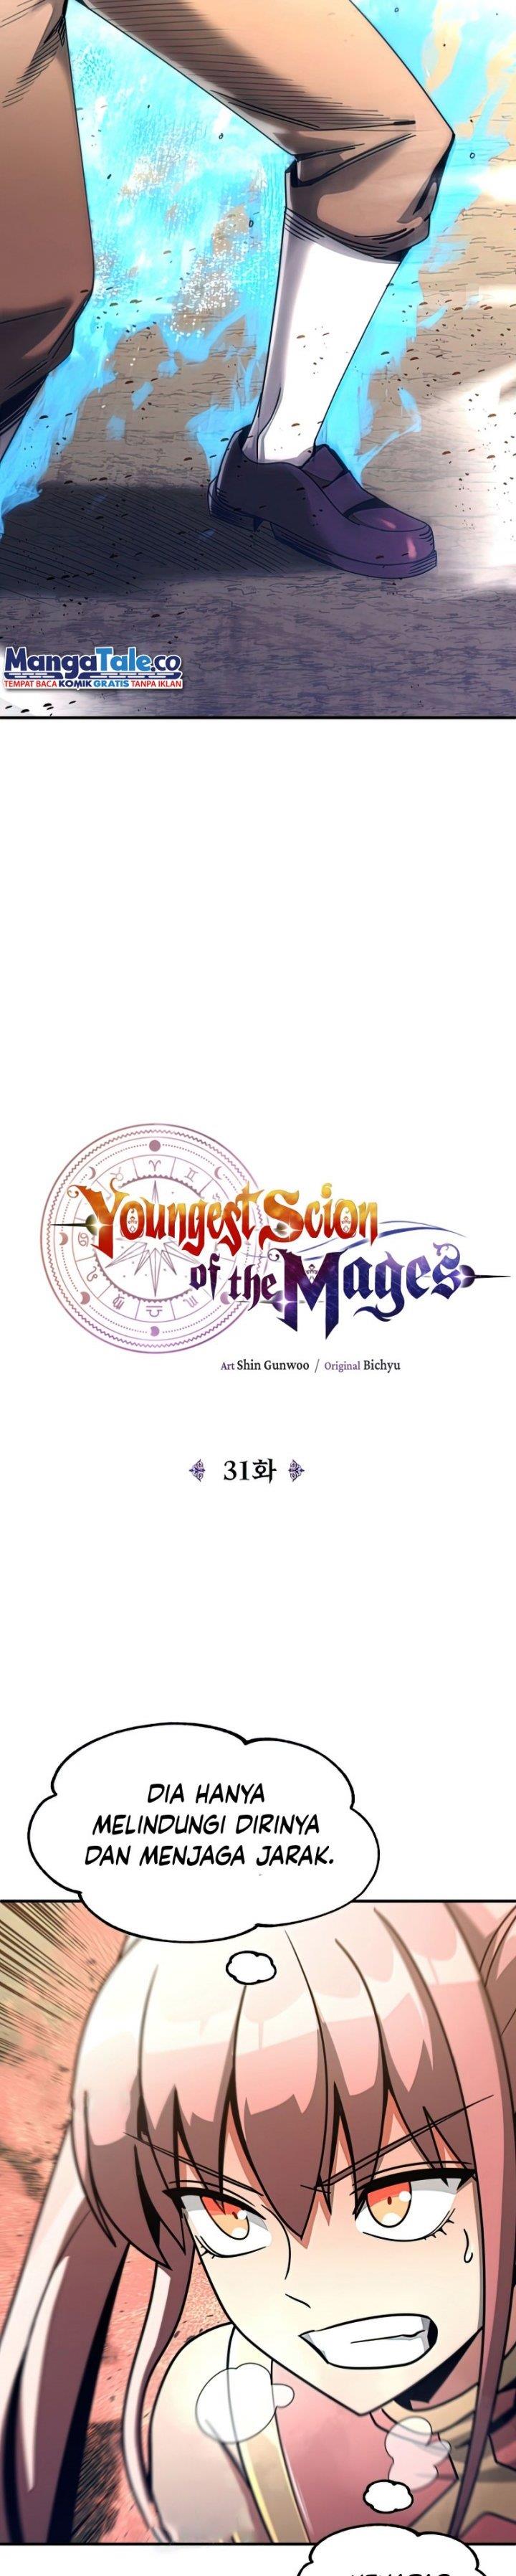 Youngest Scion of the Mages Chapter 31